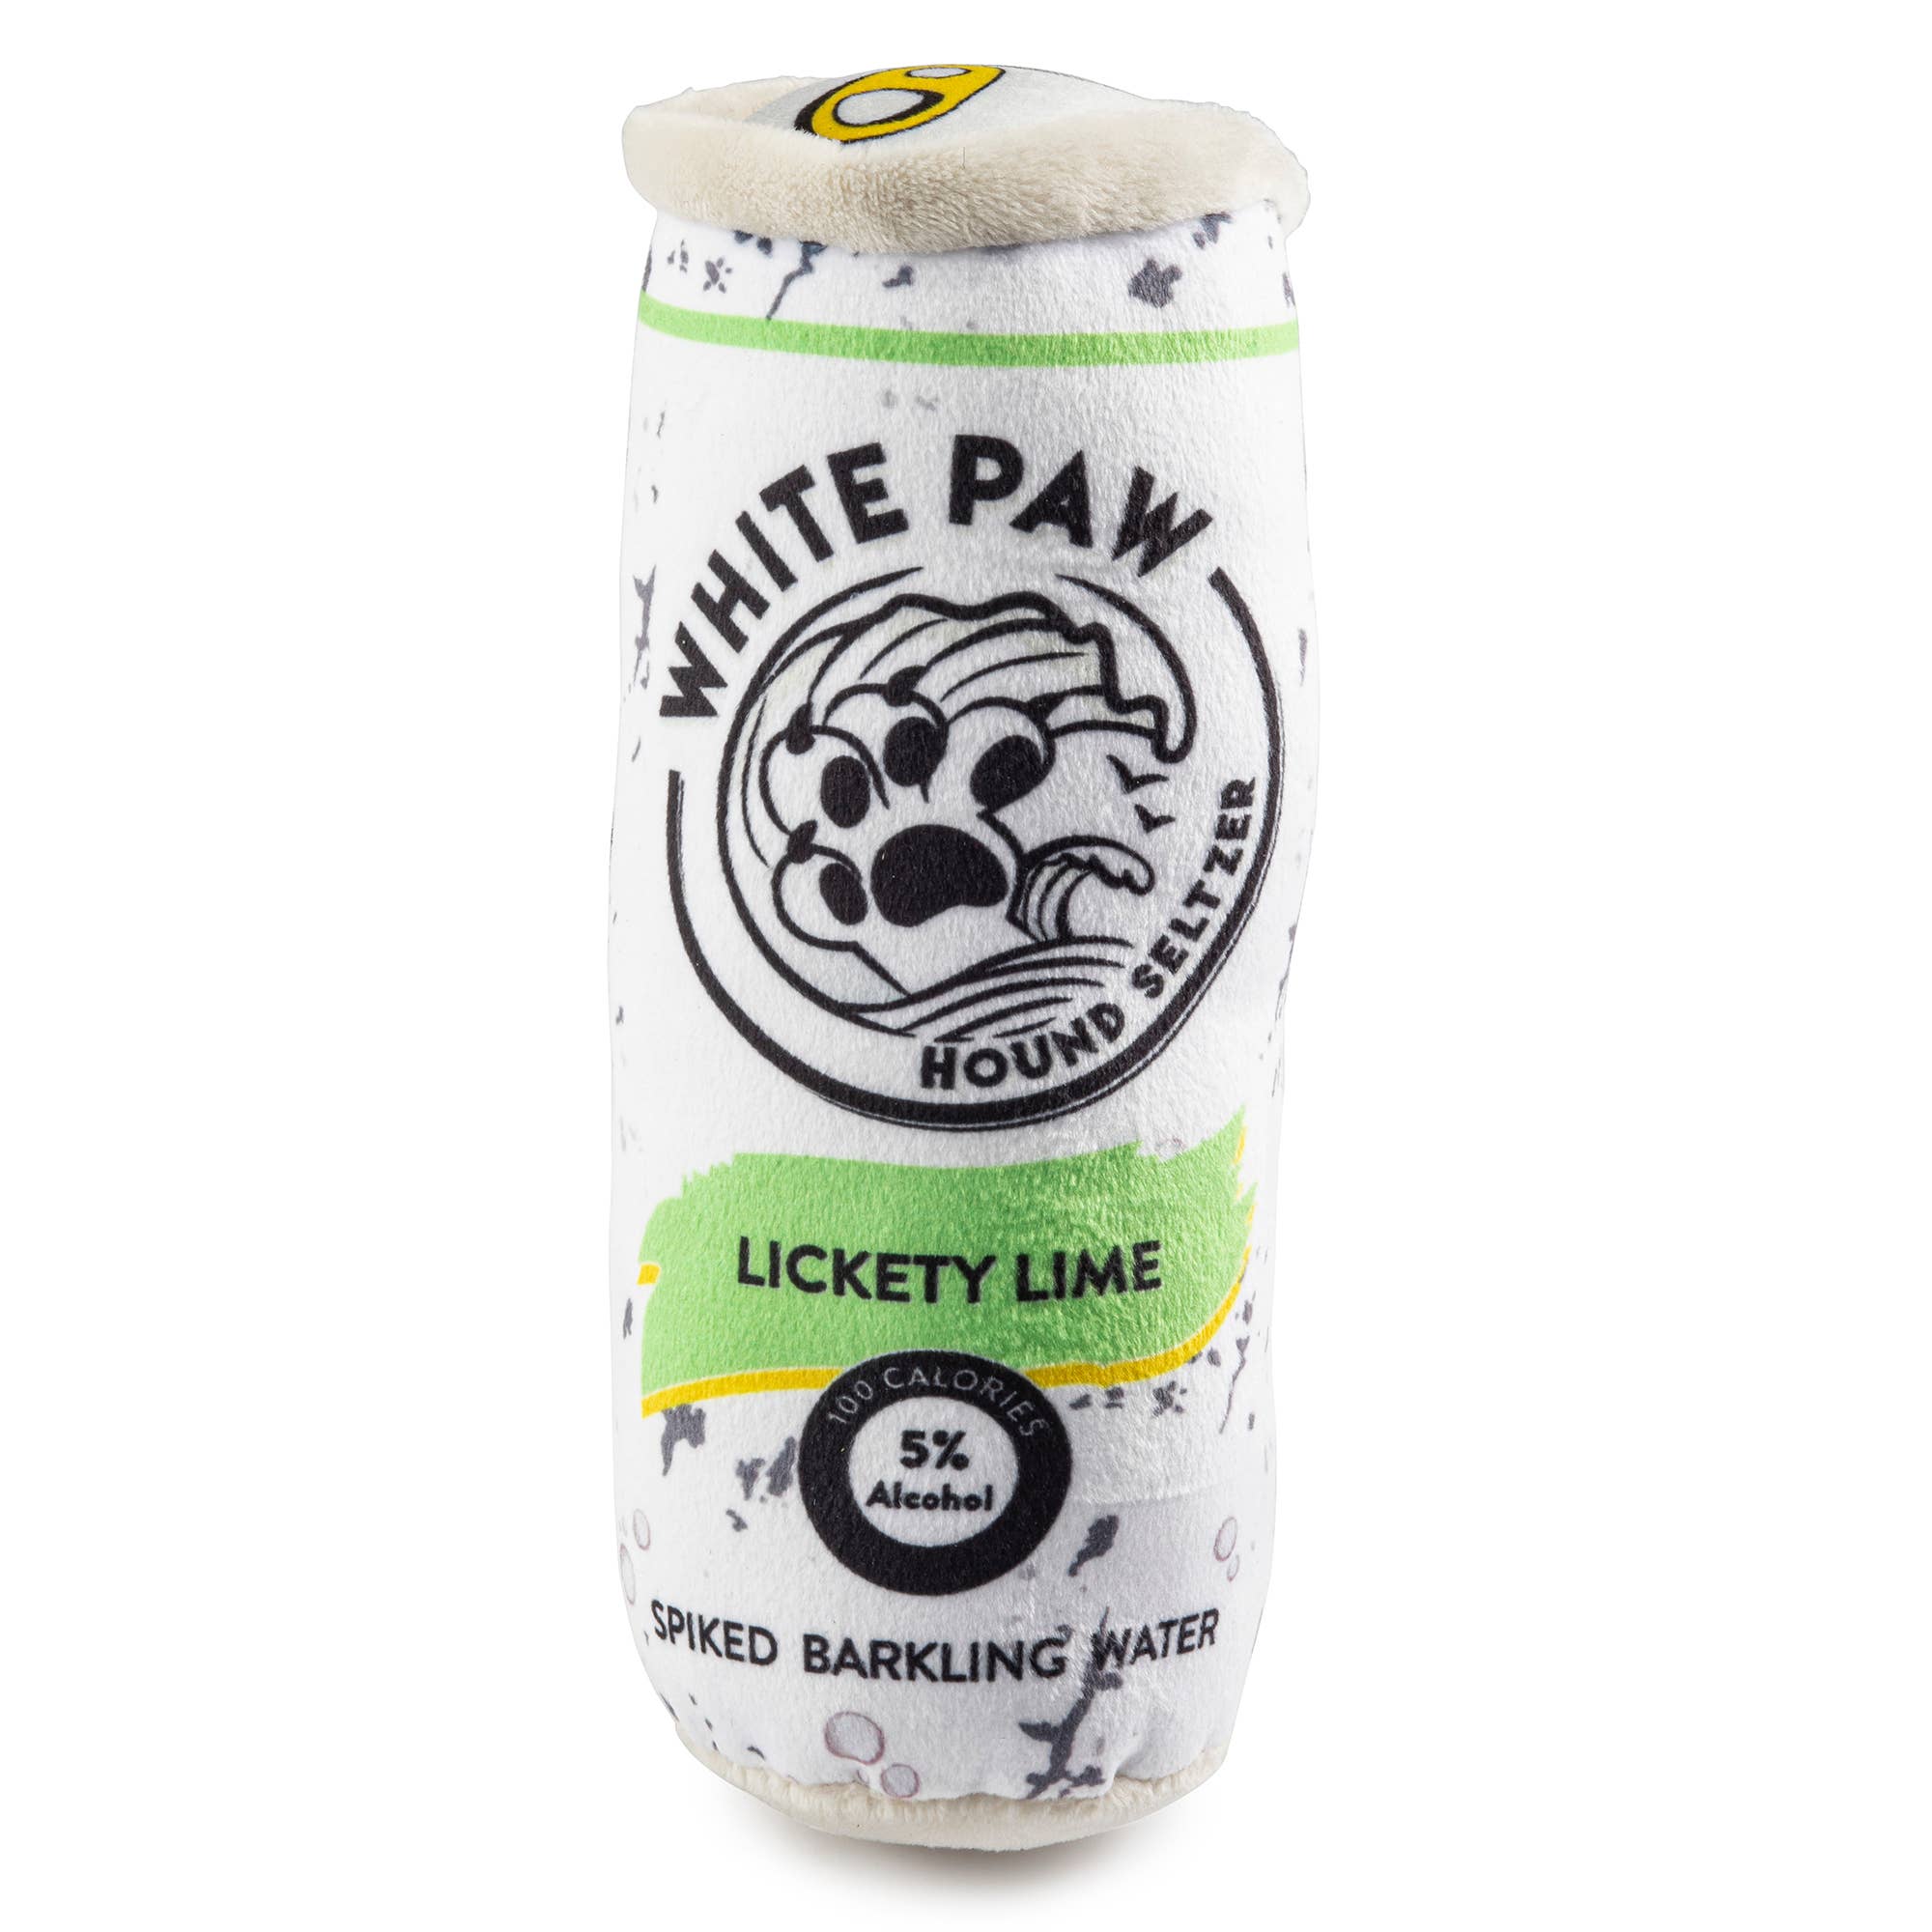 White Paw - Lickety Lime Hound